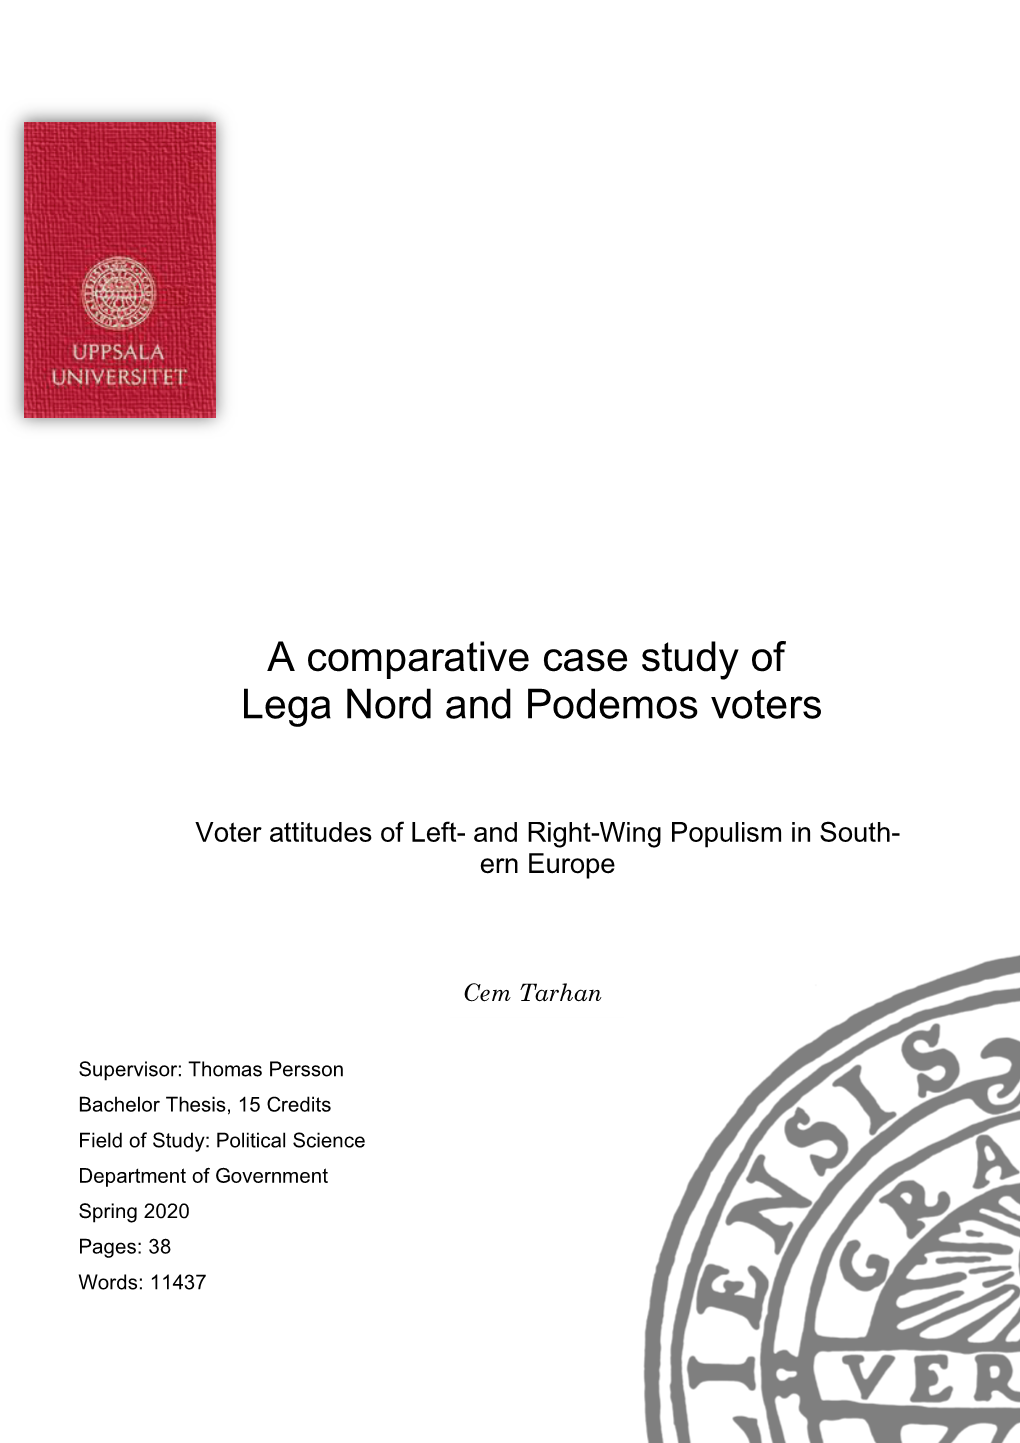 A Comparative Case Study of Lega Nord and Podemos Voters